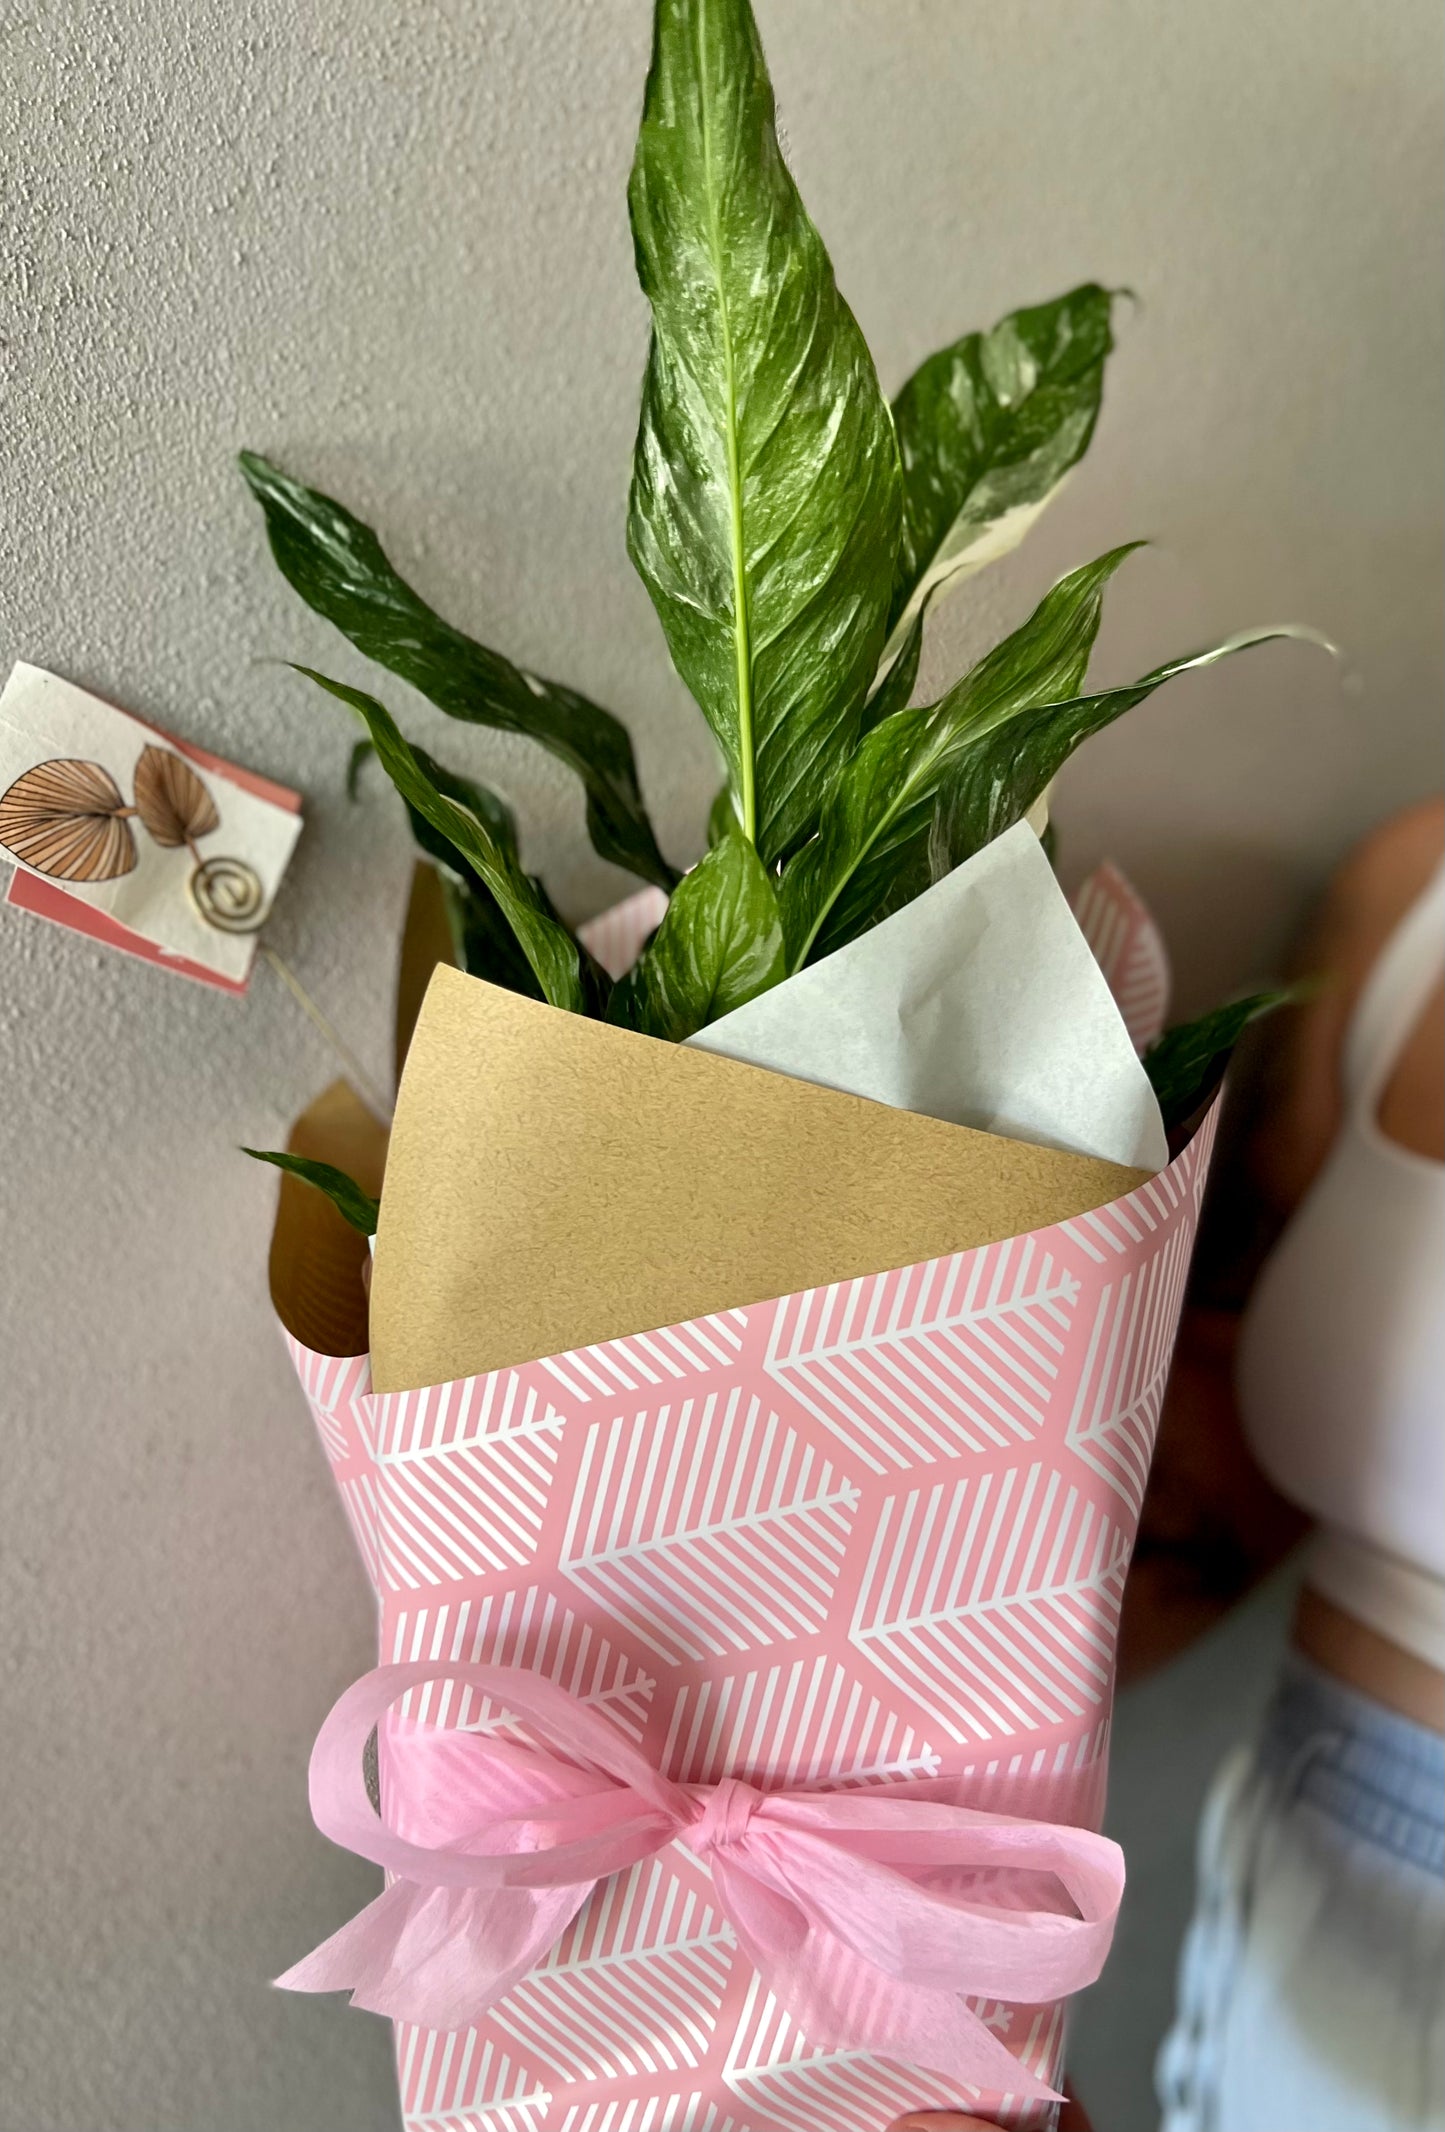 Peace Lily + Pot gift - FREE Same/next day gift delivery